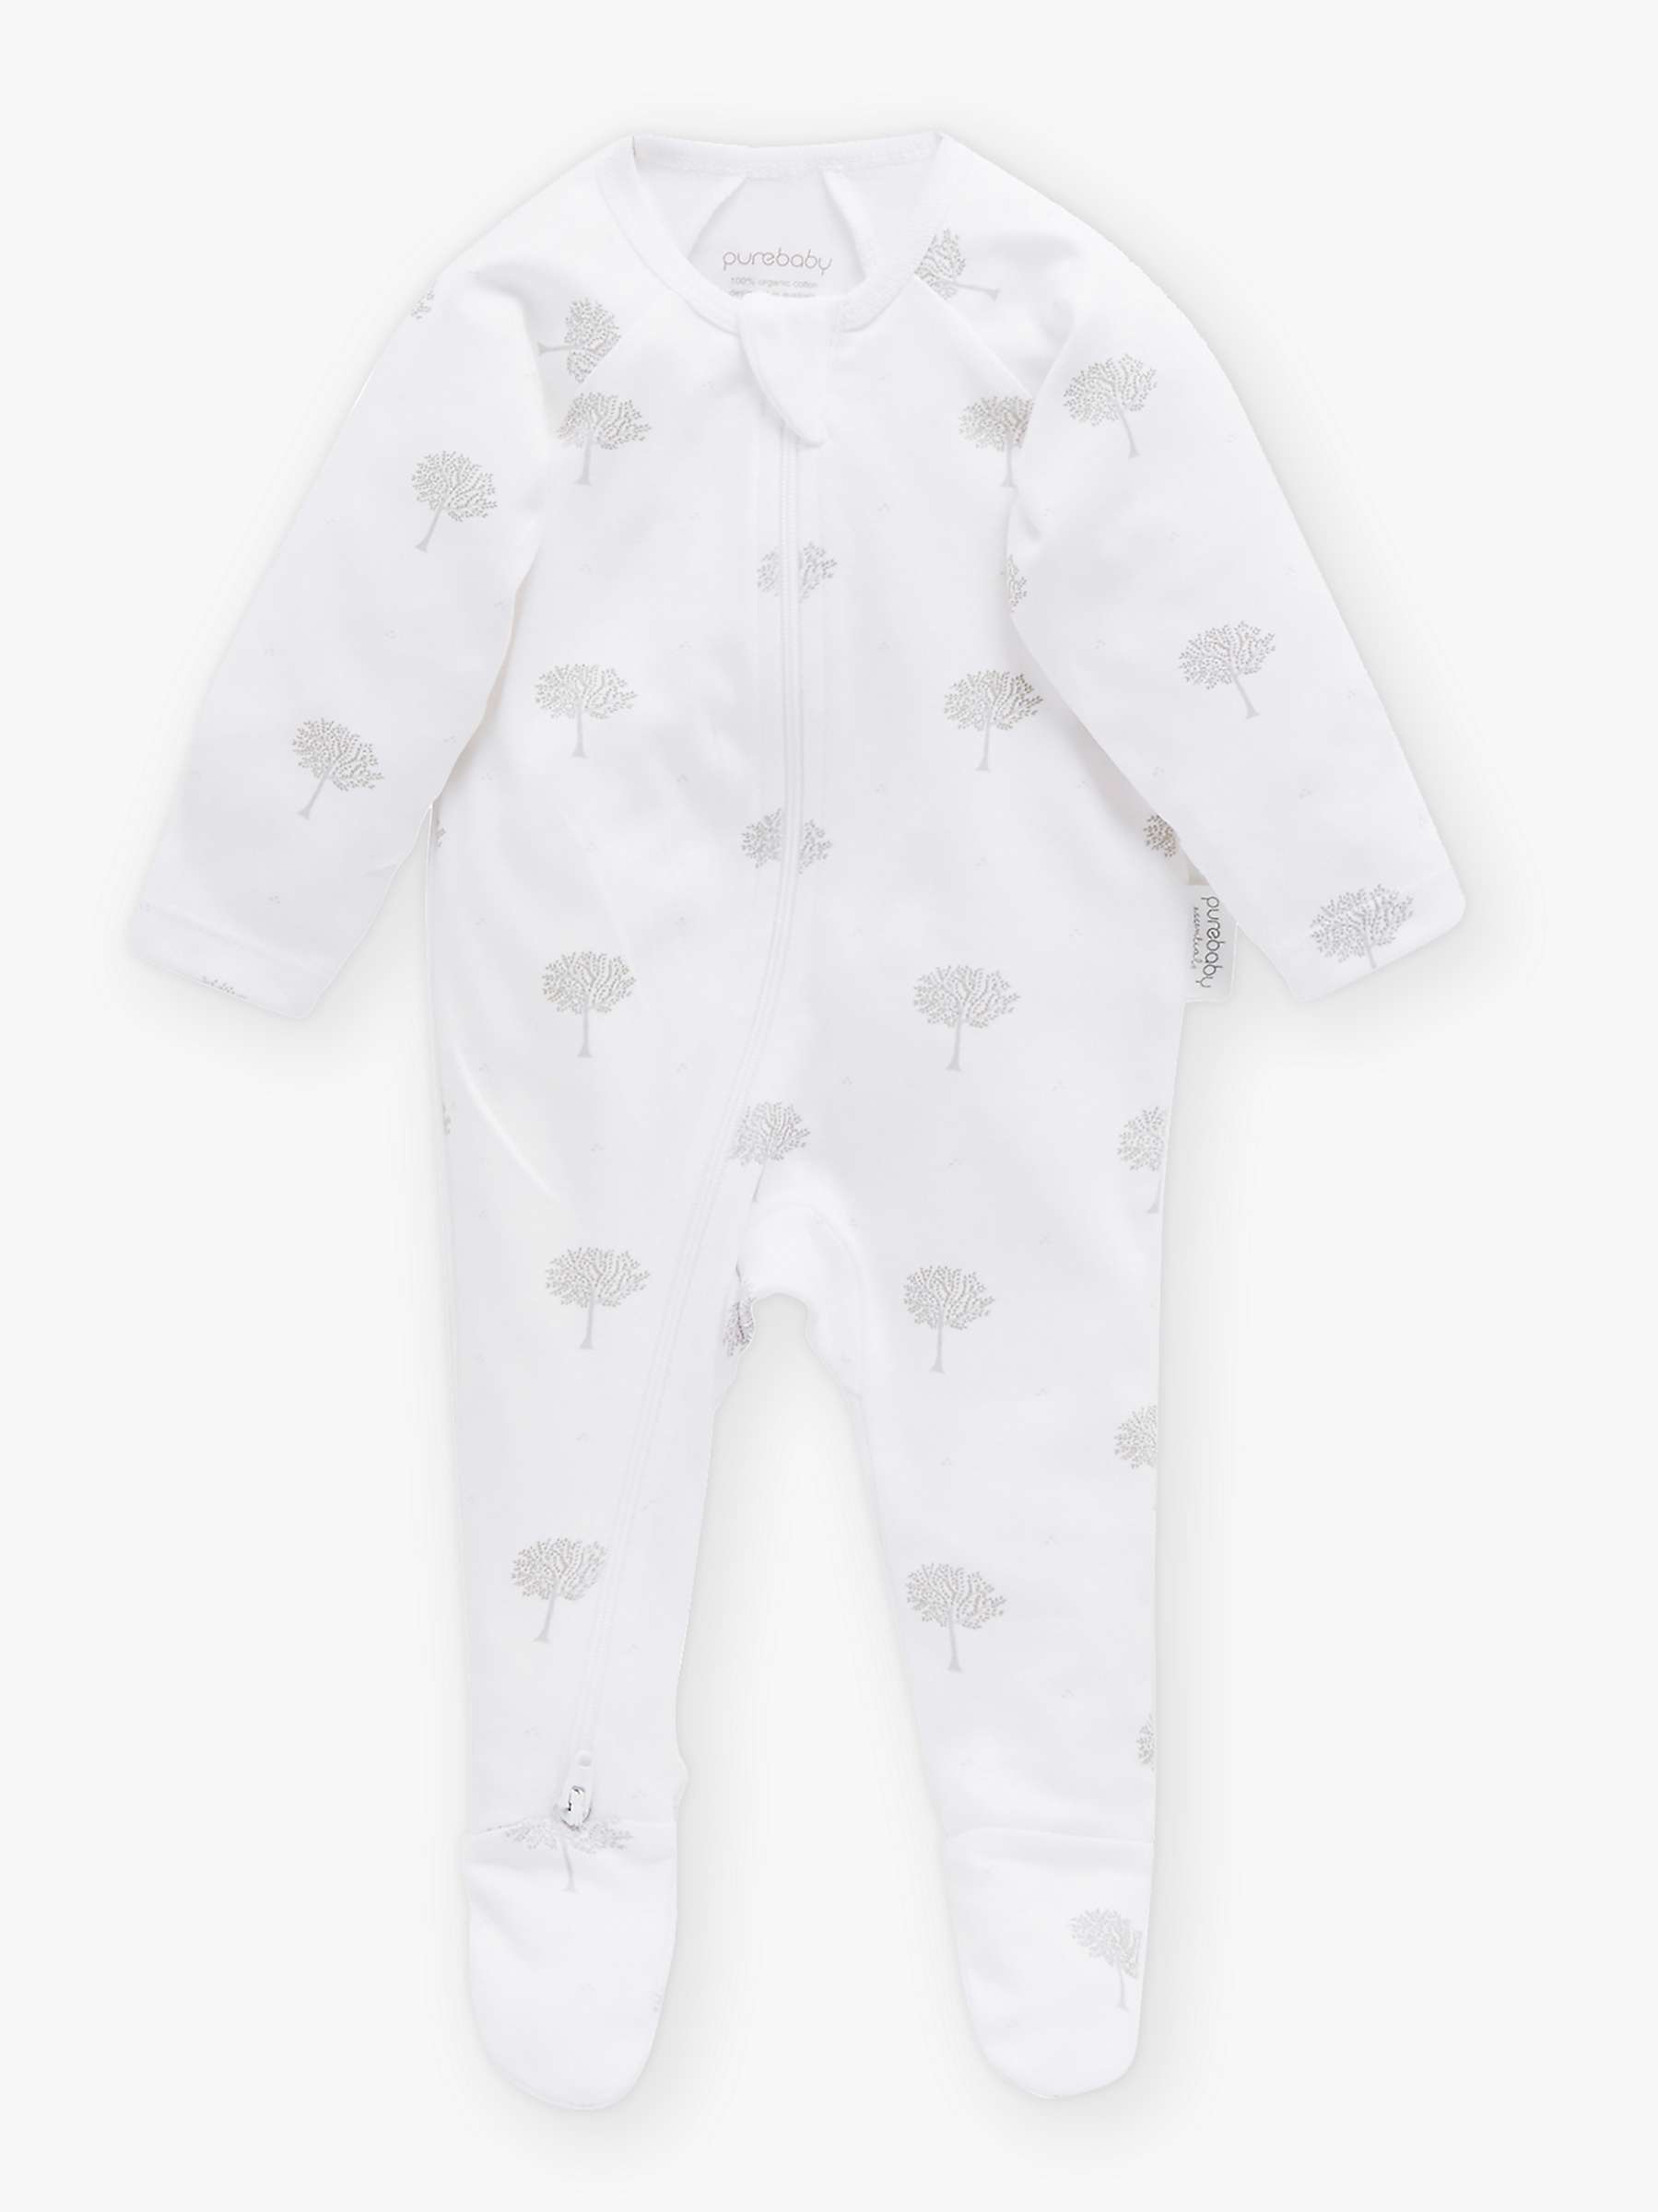 Buy Purebaby Organic Cotton Essentials Collection Newborn Hospital Gift Set, Pack of 6, White Online at johnlewis.com